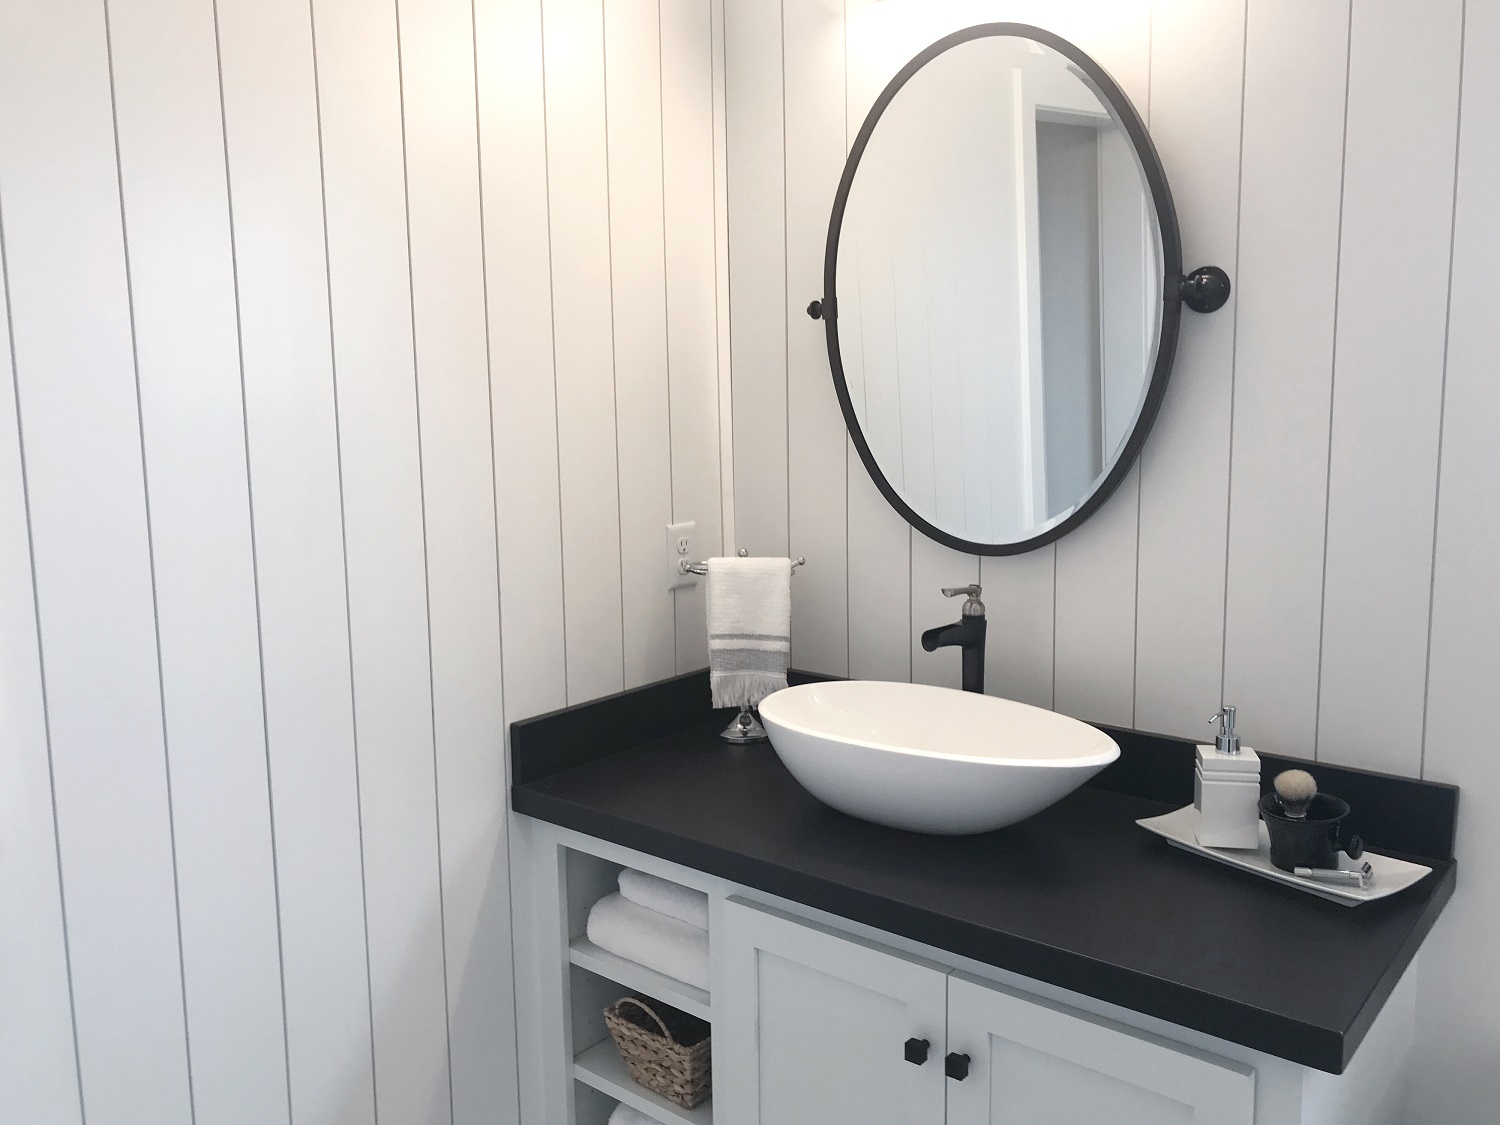 Close up lifestyle image of a black and white washbasin unit, with painted white wooden doors, black countertop, white countertop basin and matt black tall basin tap